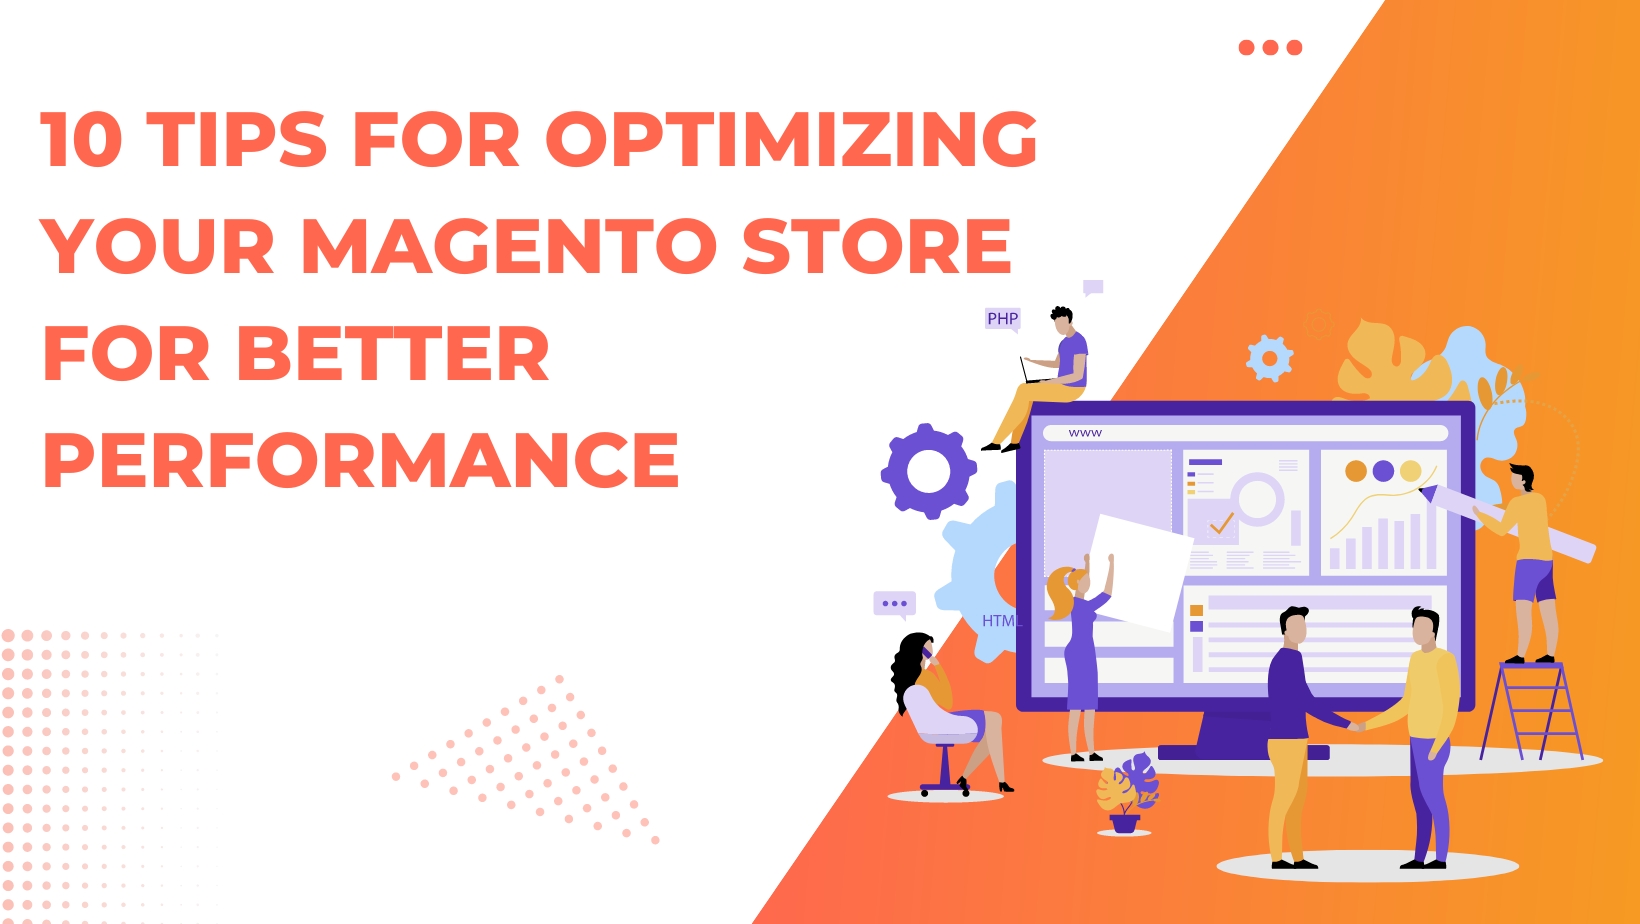 Tips for Optimizing Magento Store